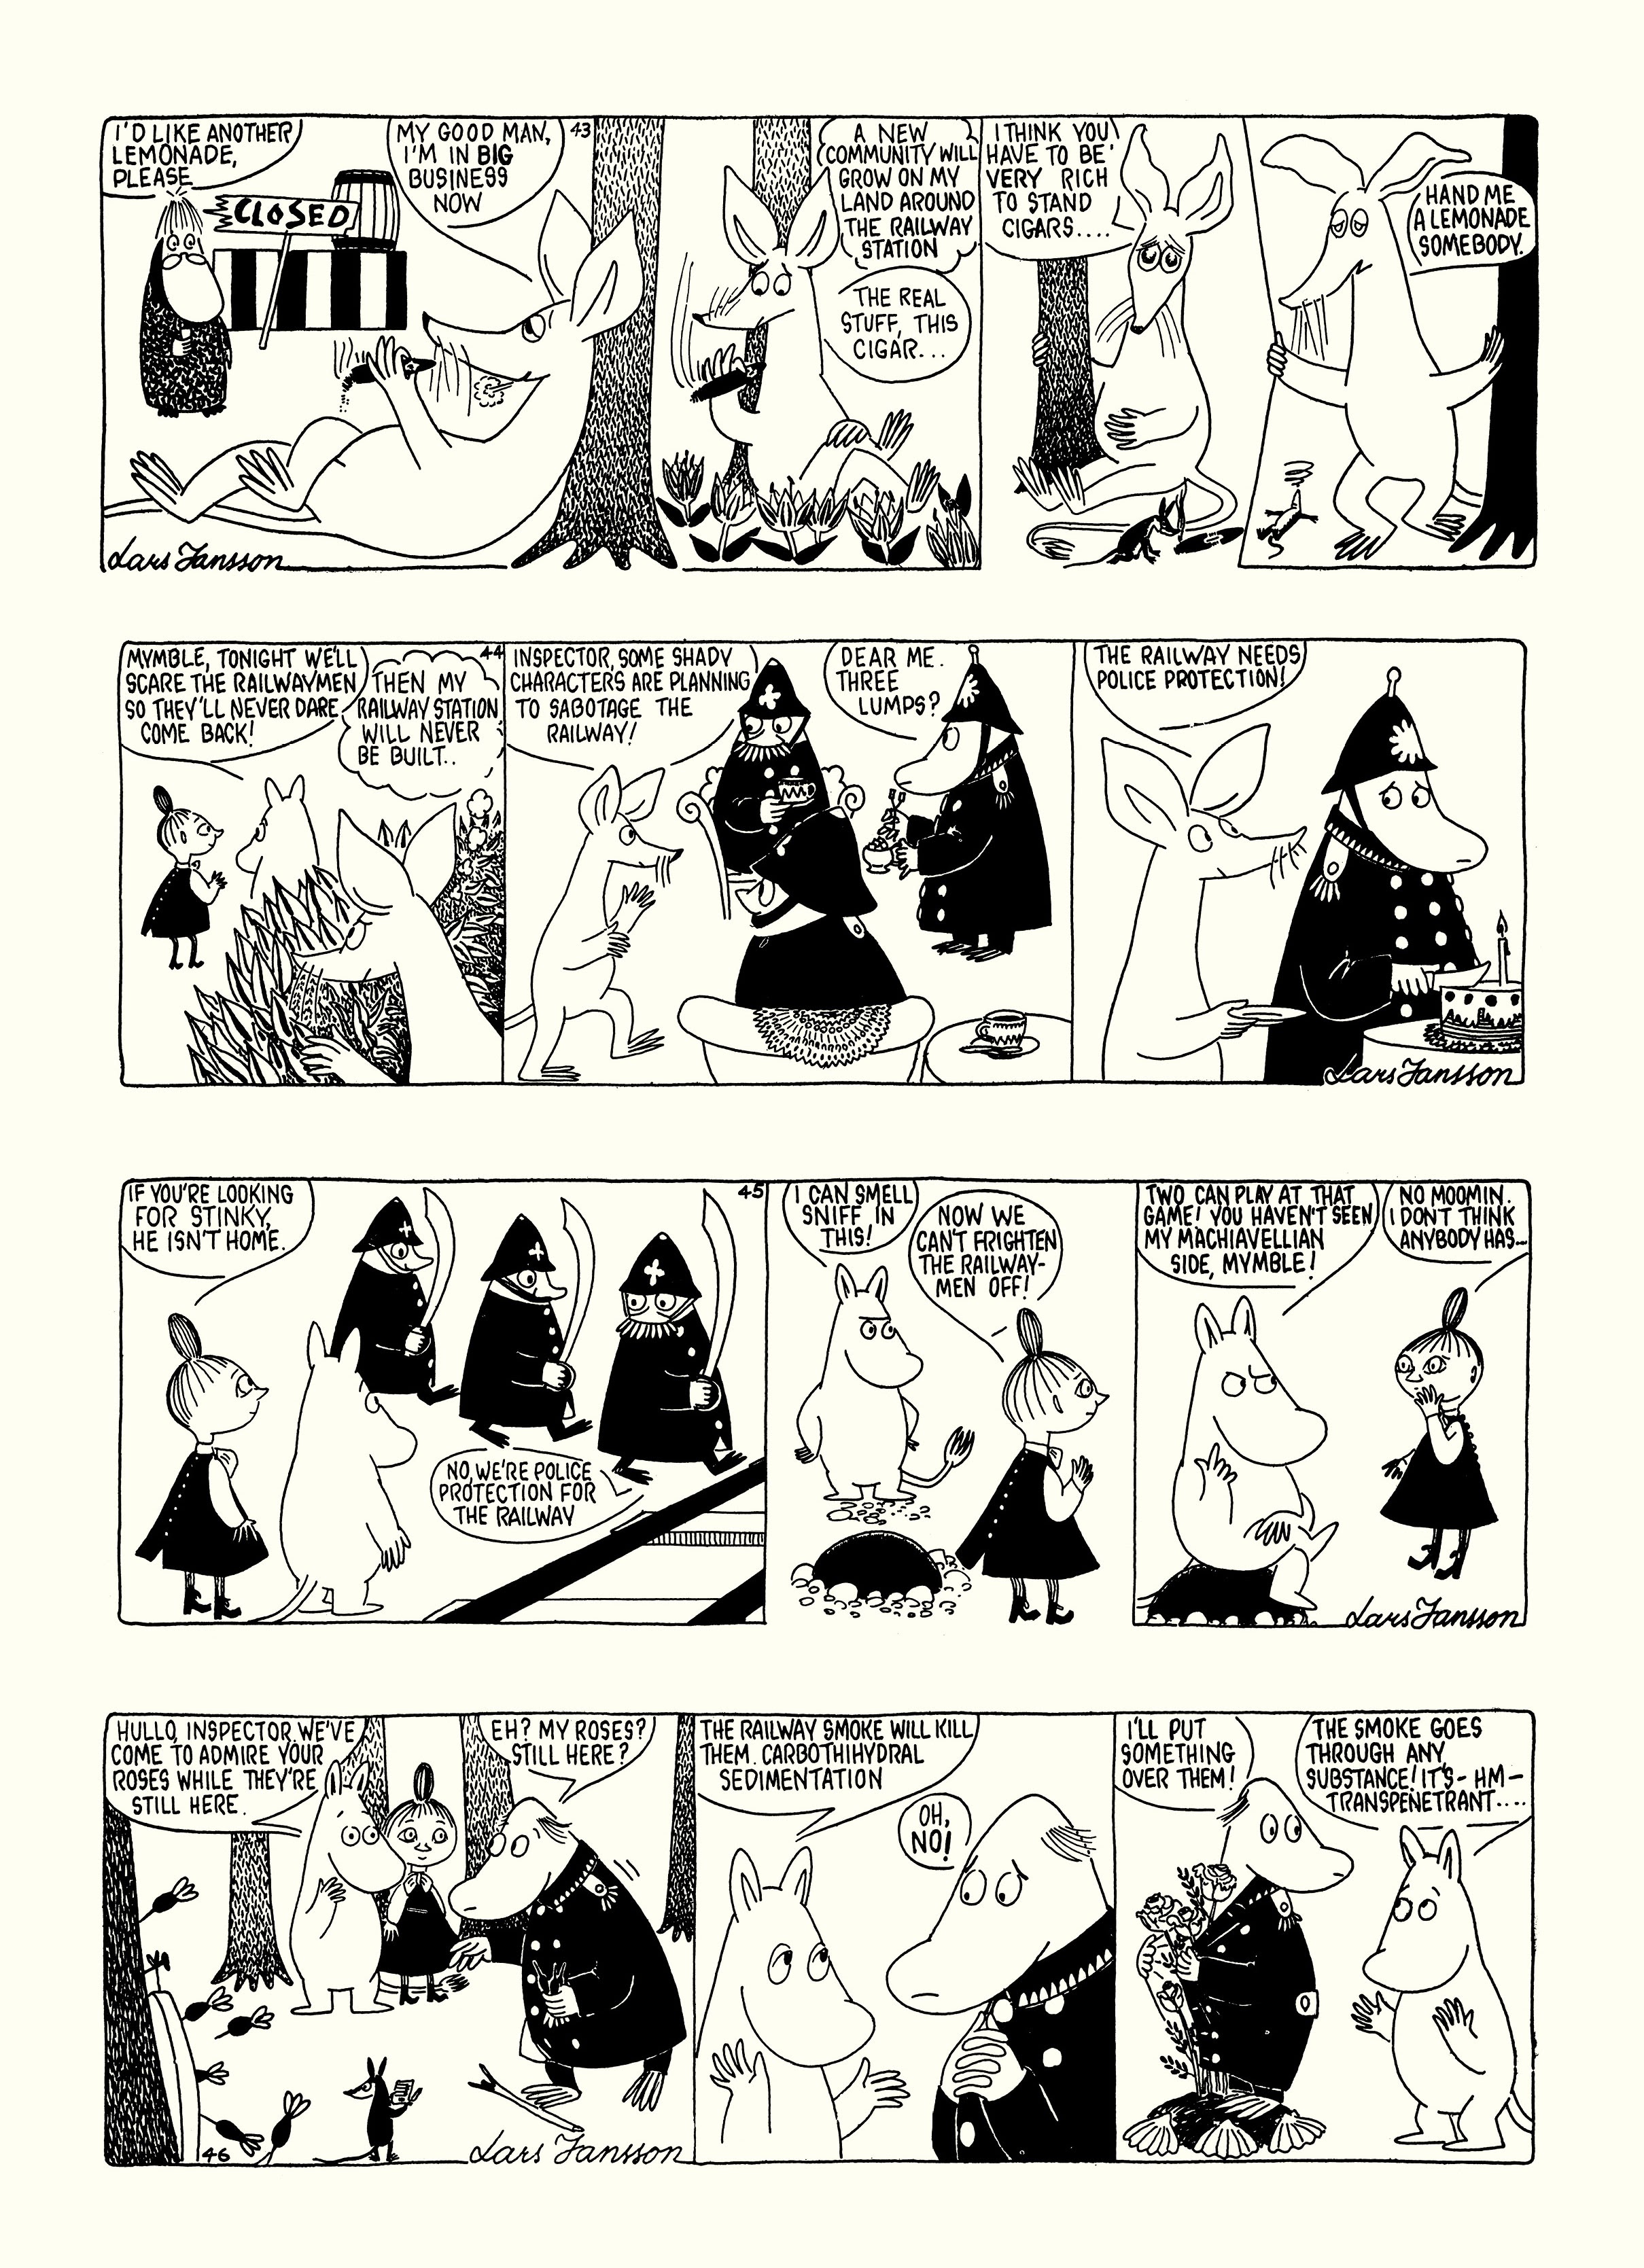 Read online Moomin: The Complete Lars Jansson Comic Strip comic -  Issue # TPB 6 - 37